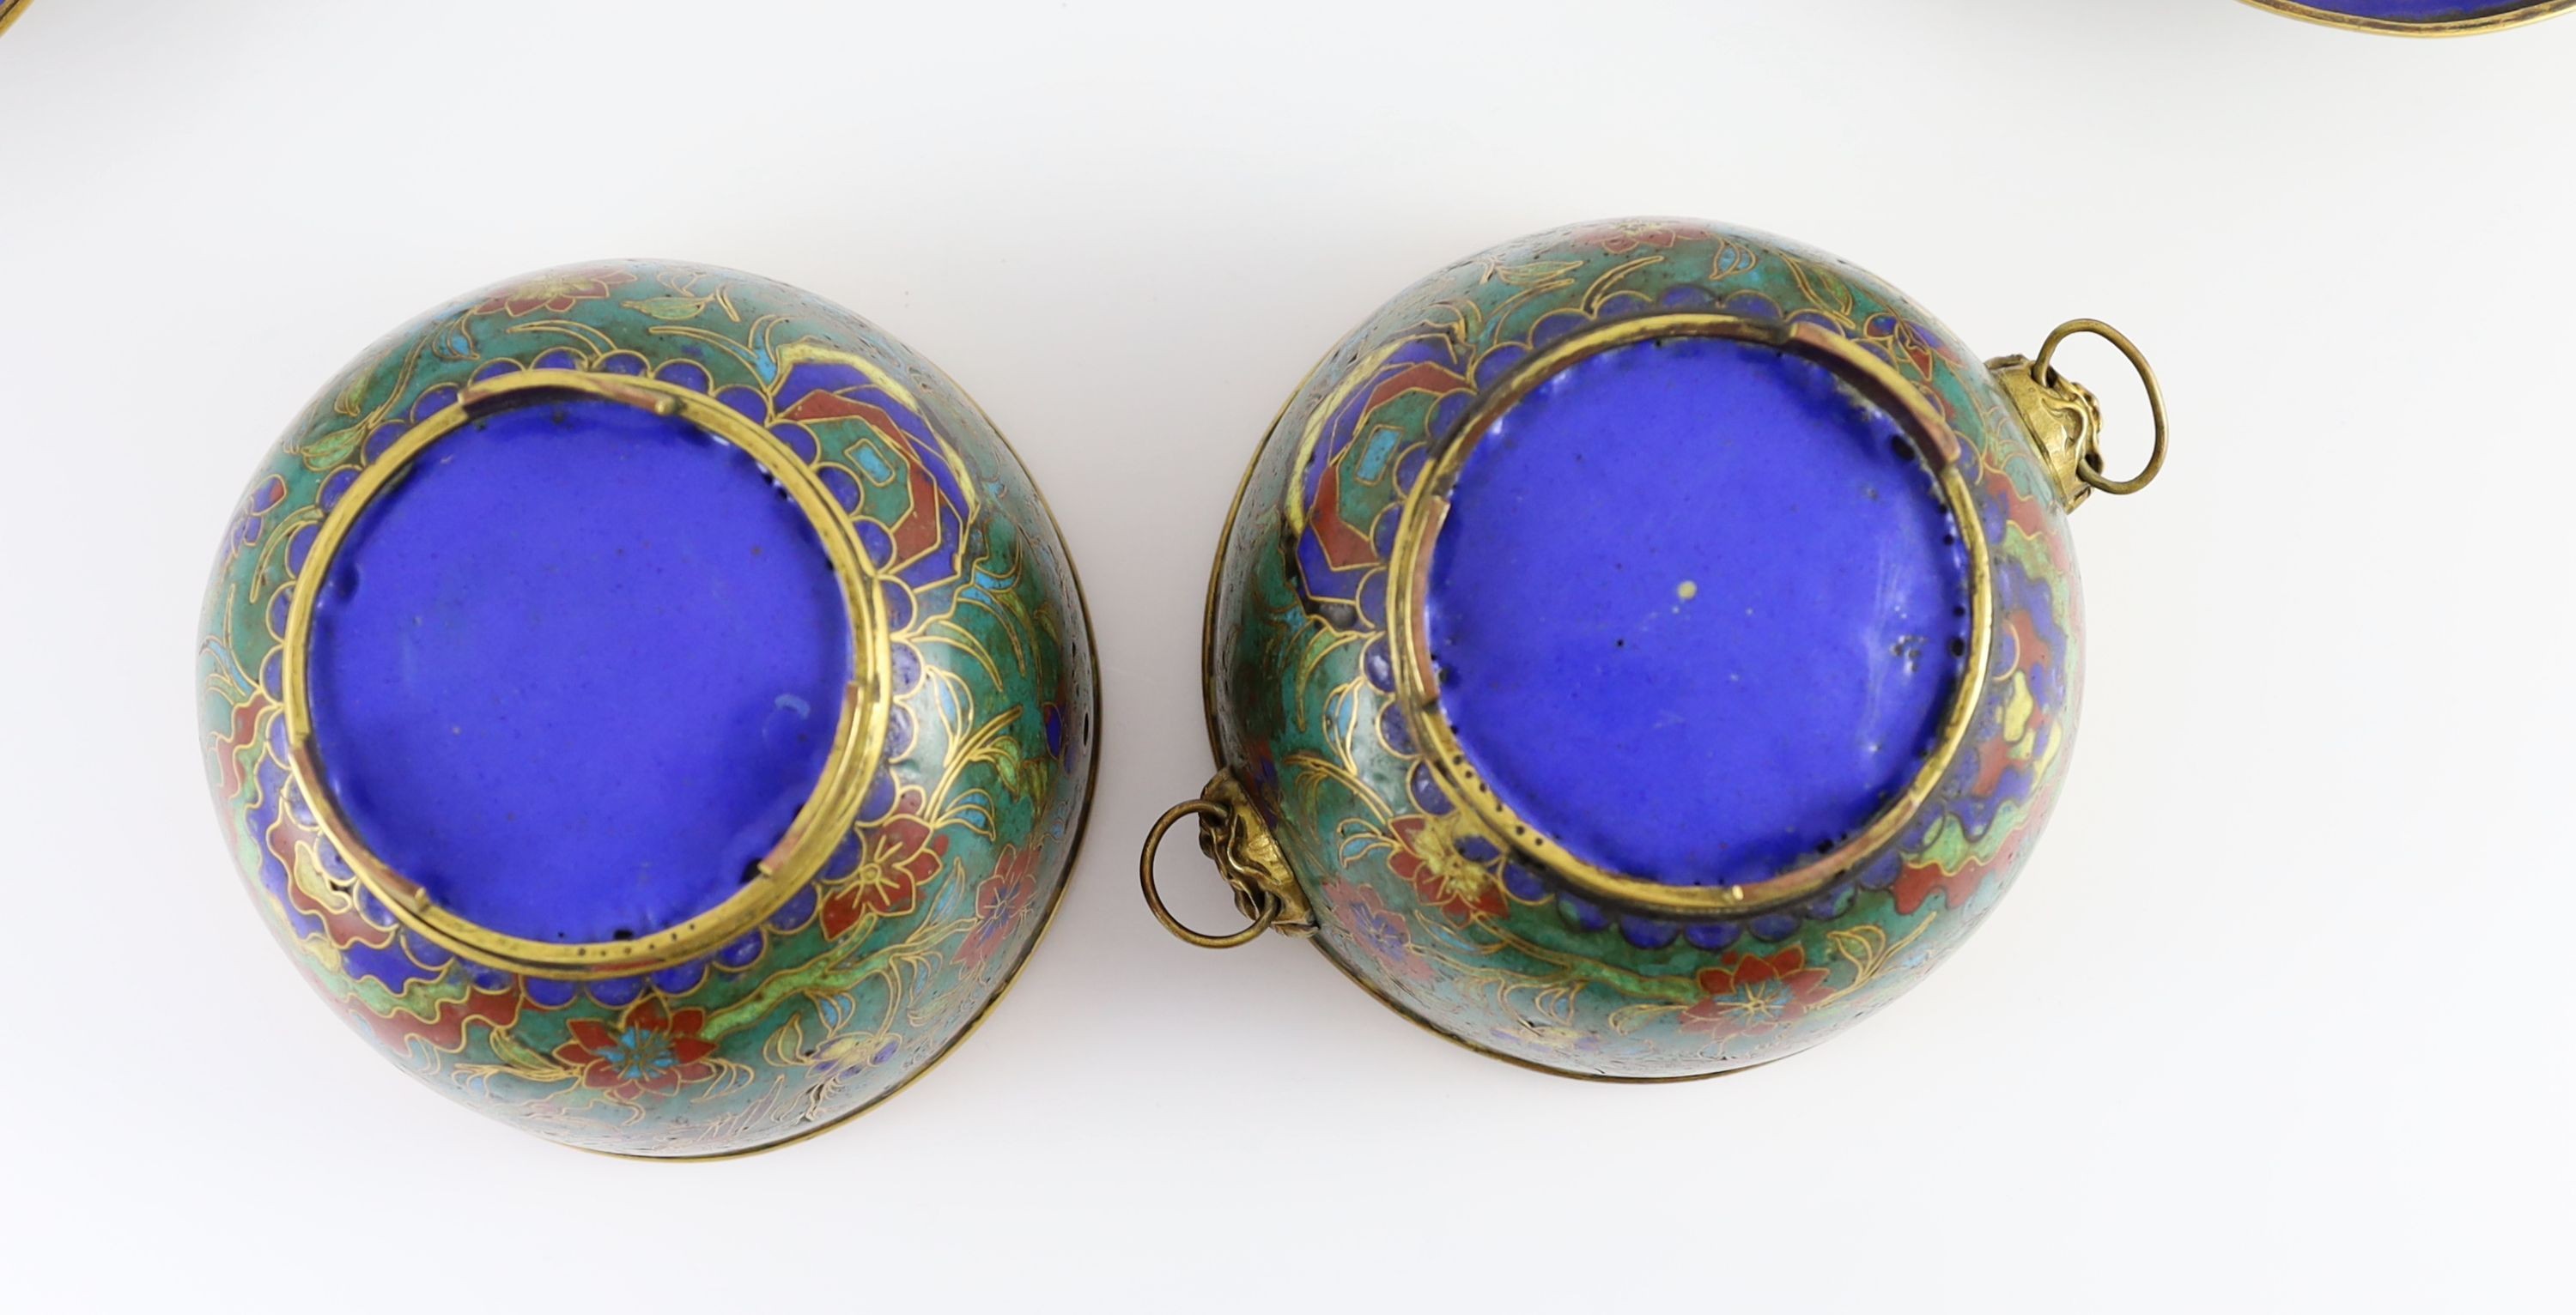 A pair of Chinese cloisonné enamel jars and covers, 18th/19th century 15.2 cm wide, one handle lacking